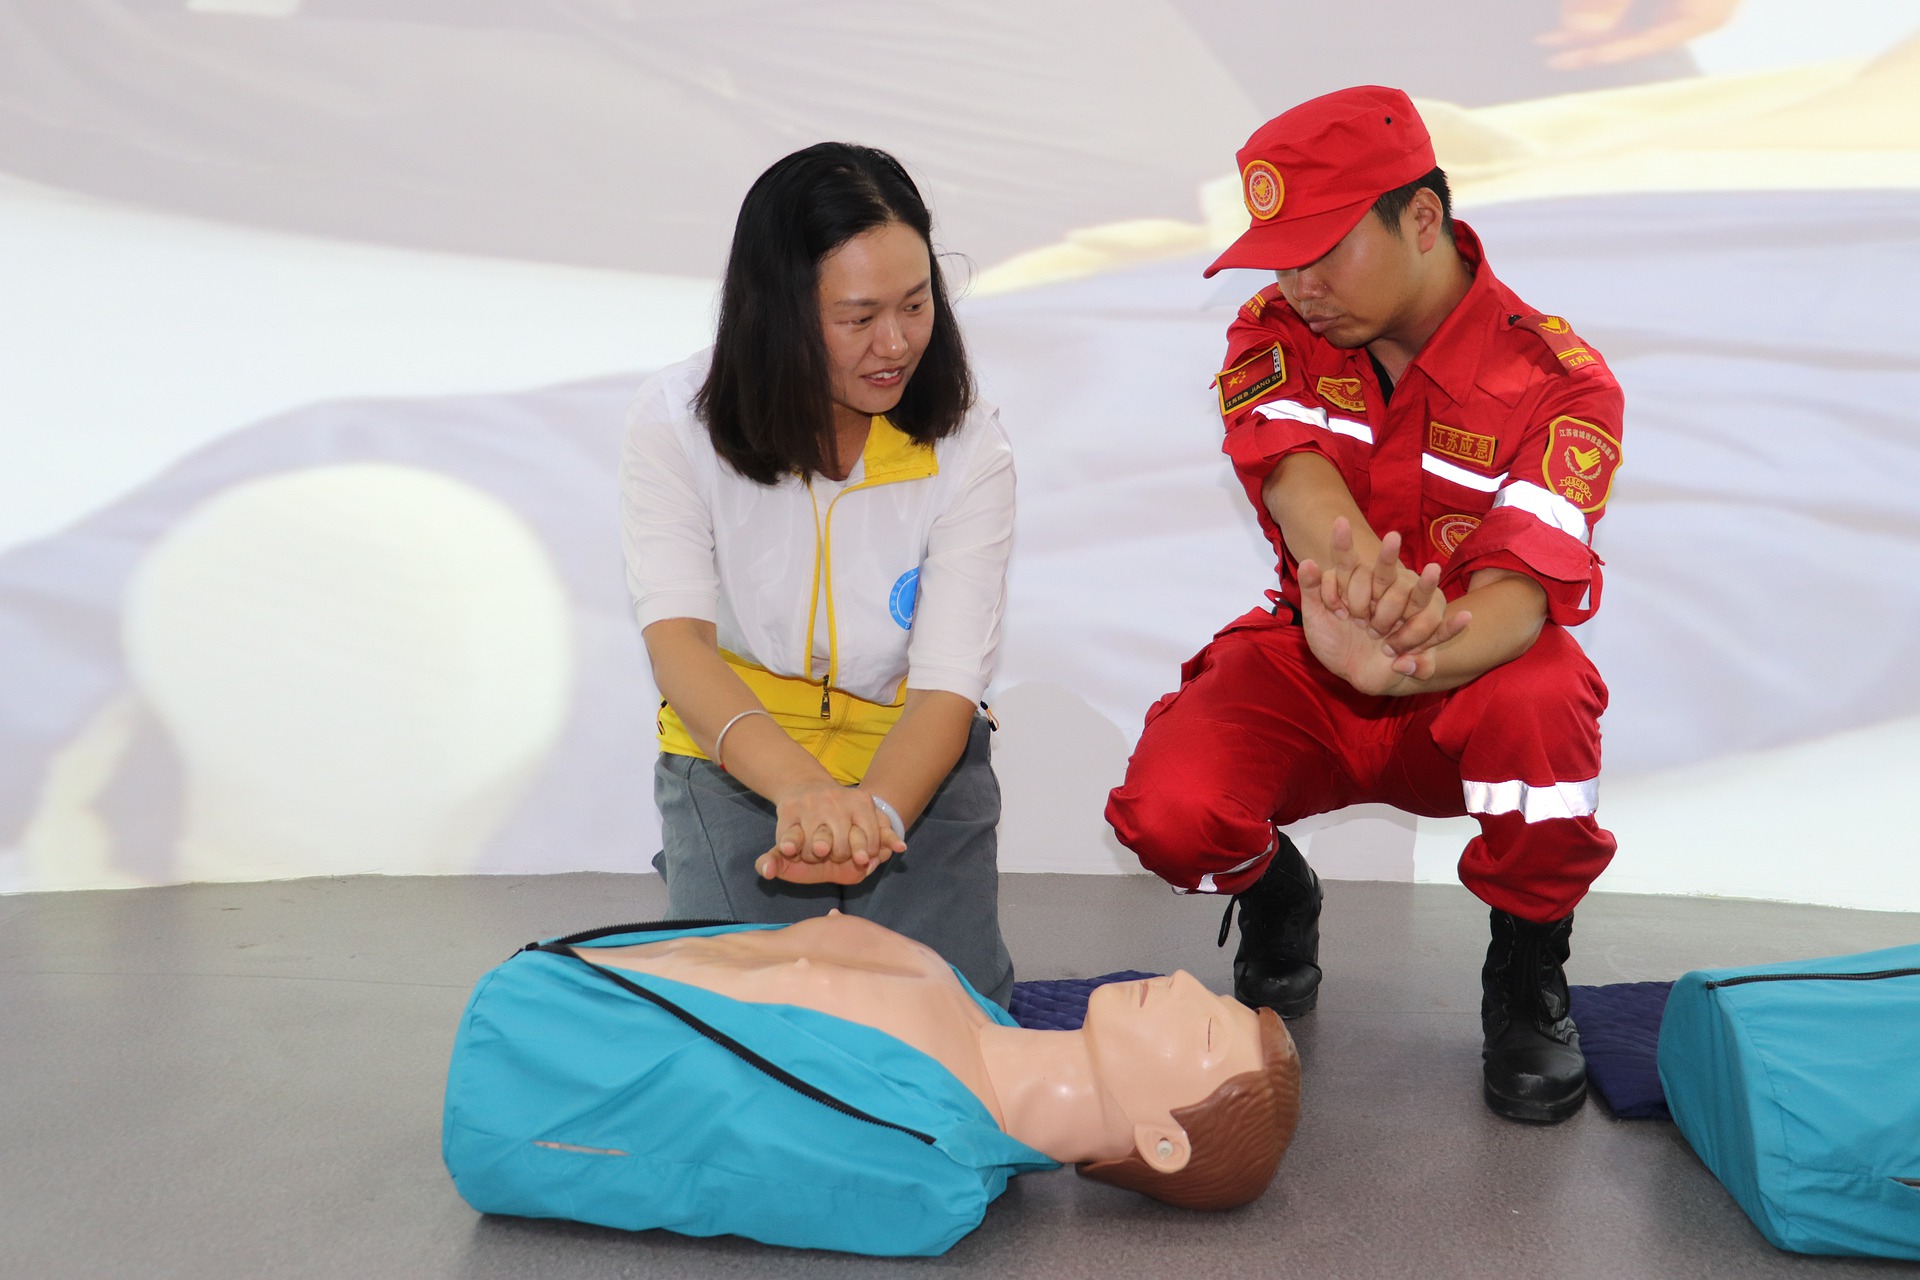 Woman learning how to perform CPR with emergency professional and mannequin